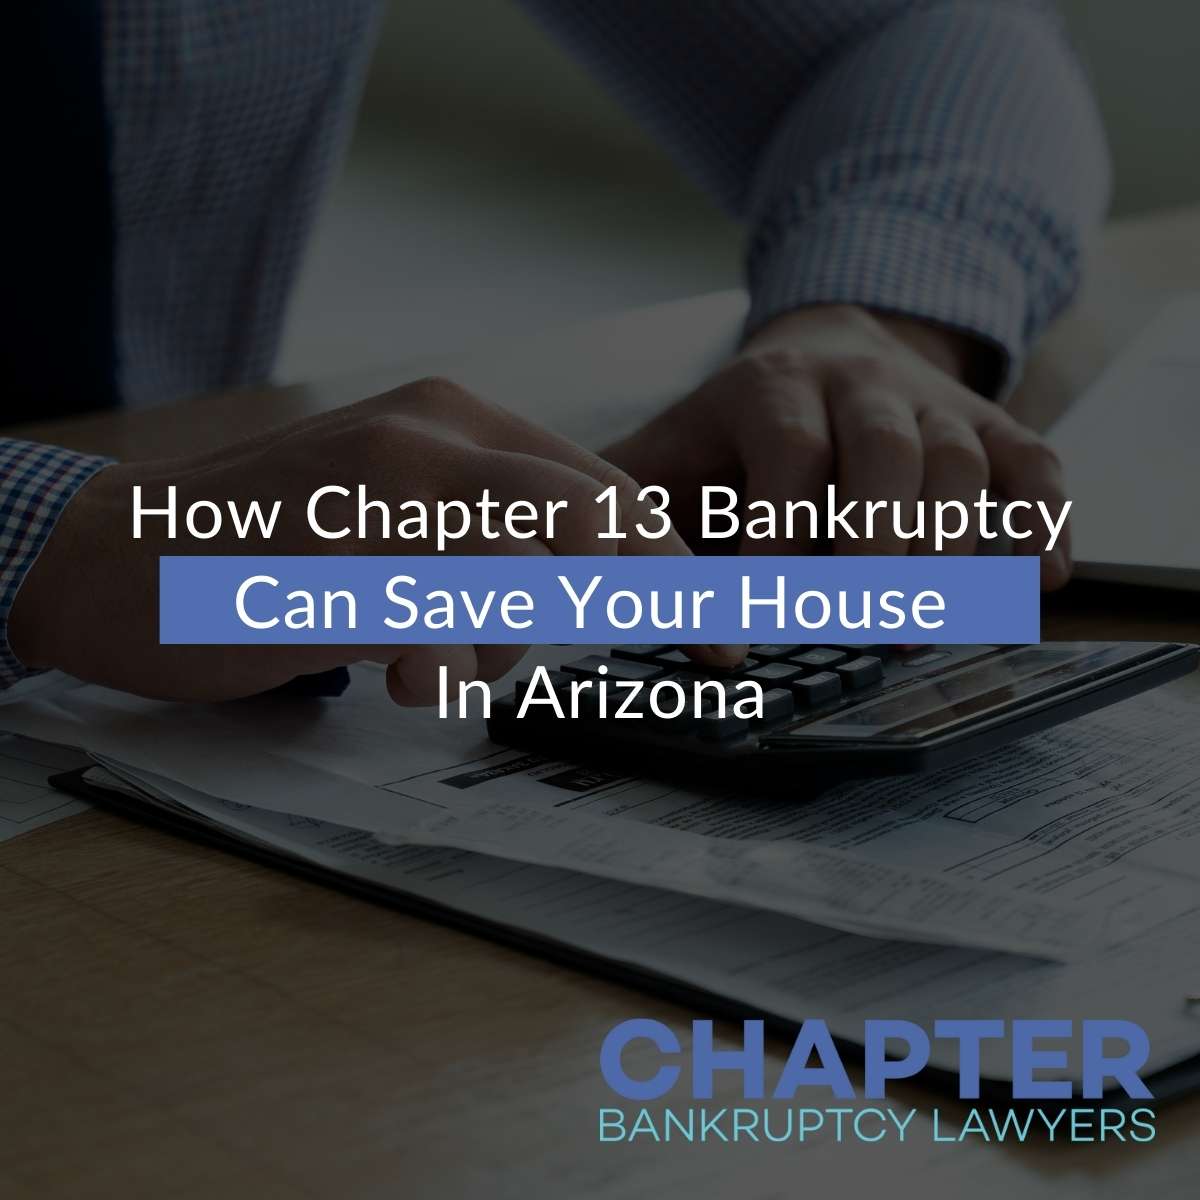 How Chapter 13 Bankruptcy Can Save Your House in Arizona